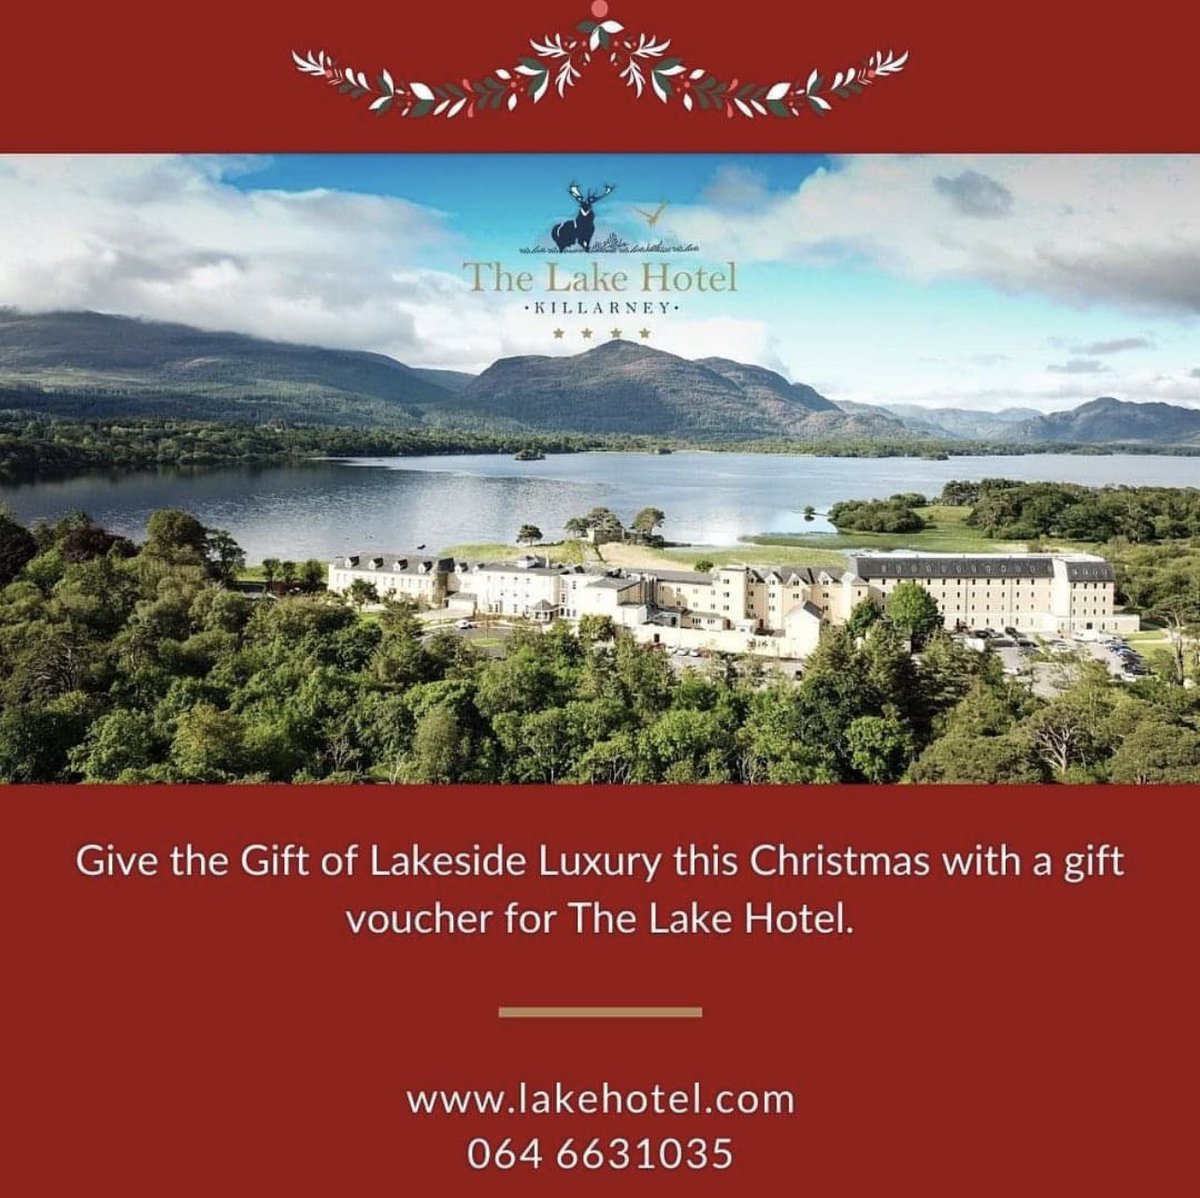 Bestow the gift of a luxurious escape, award winning dining & breathtaking views this Christmas. Visit lakehotel.com or phone 064 6631035 for more information. #giftideas #giftvouchers #christmasvoucher #lakehotelkillarney #familyownedhotel